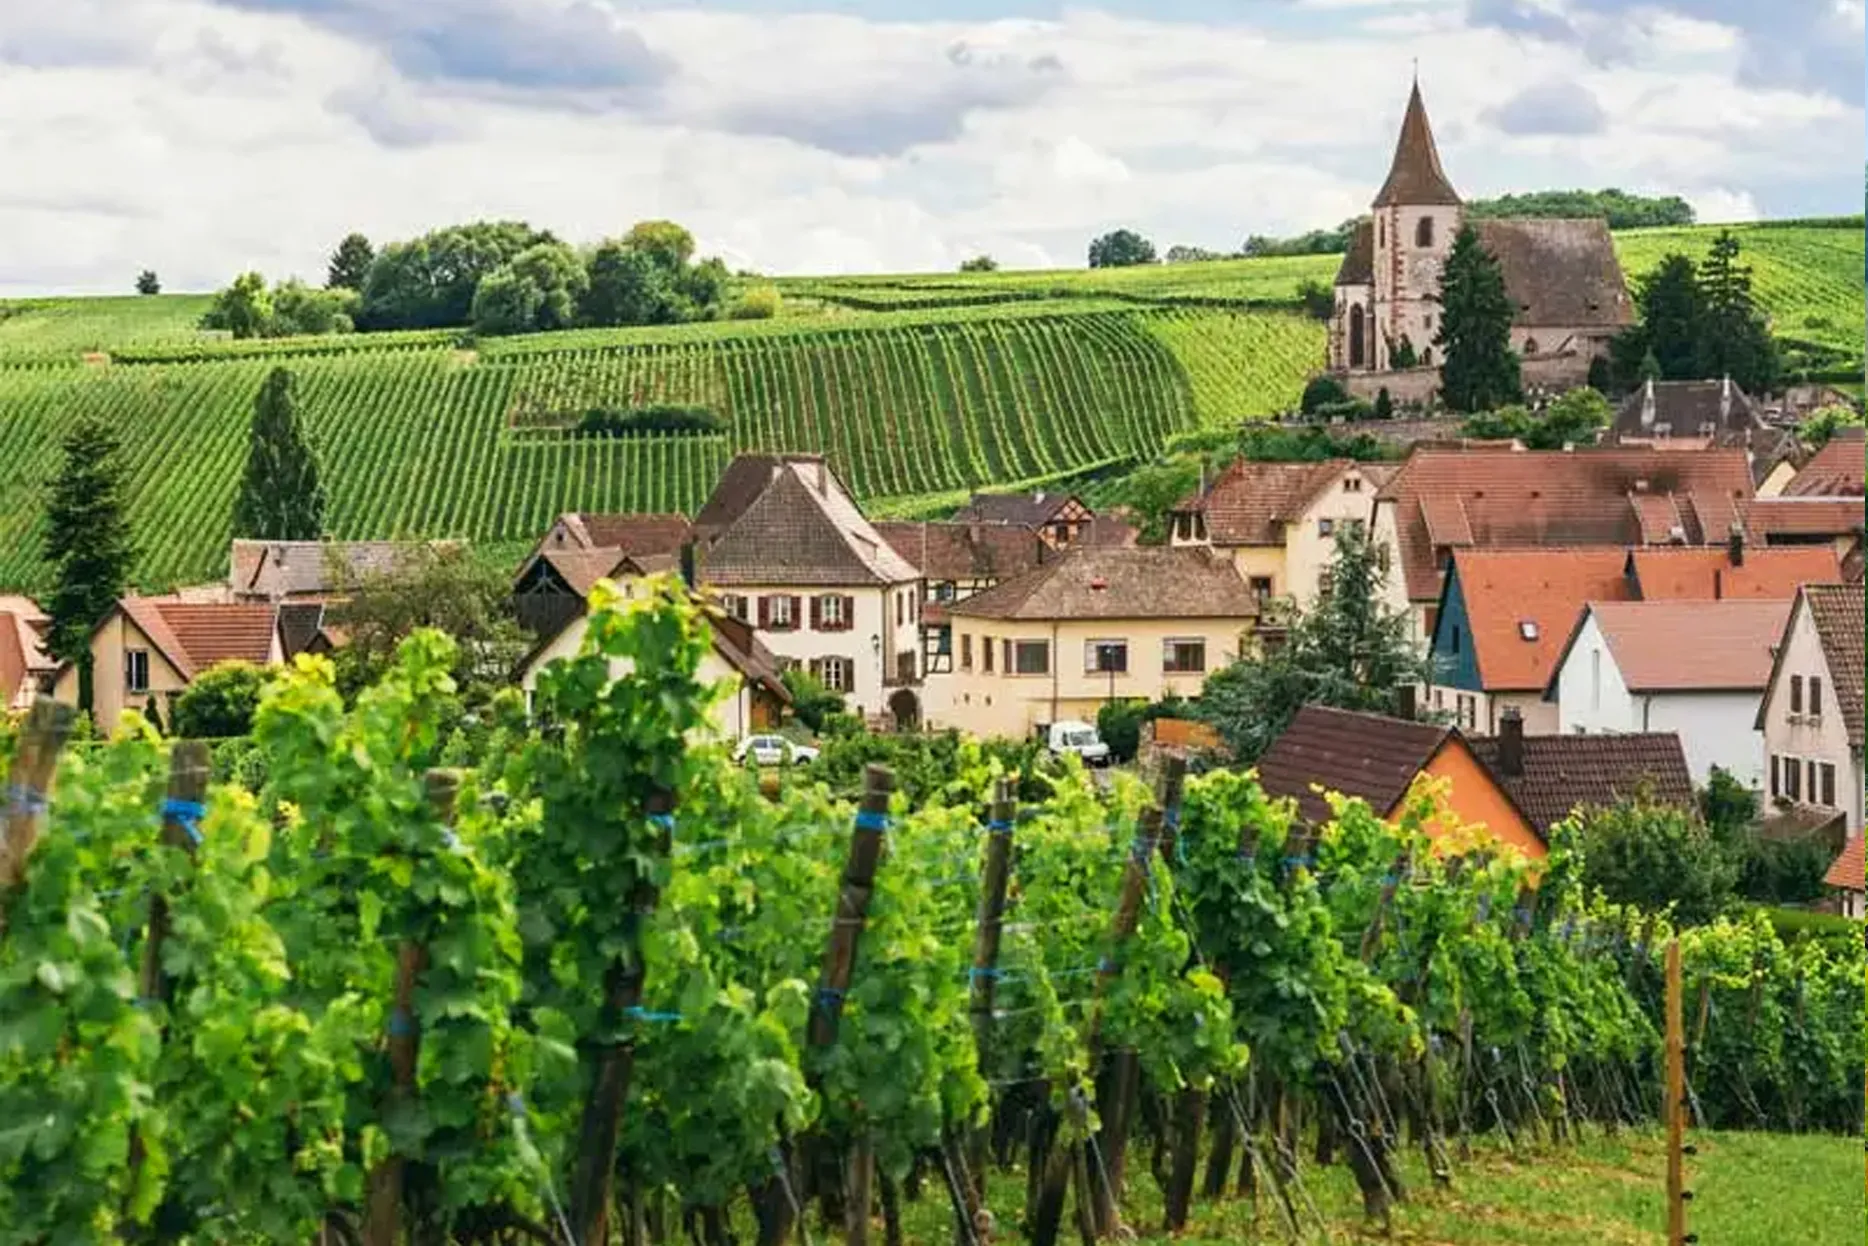 Views over a town in Burgundy, France from a vineyard located on a hill nearby